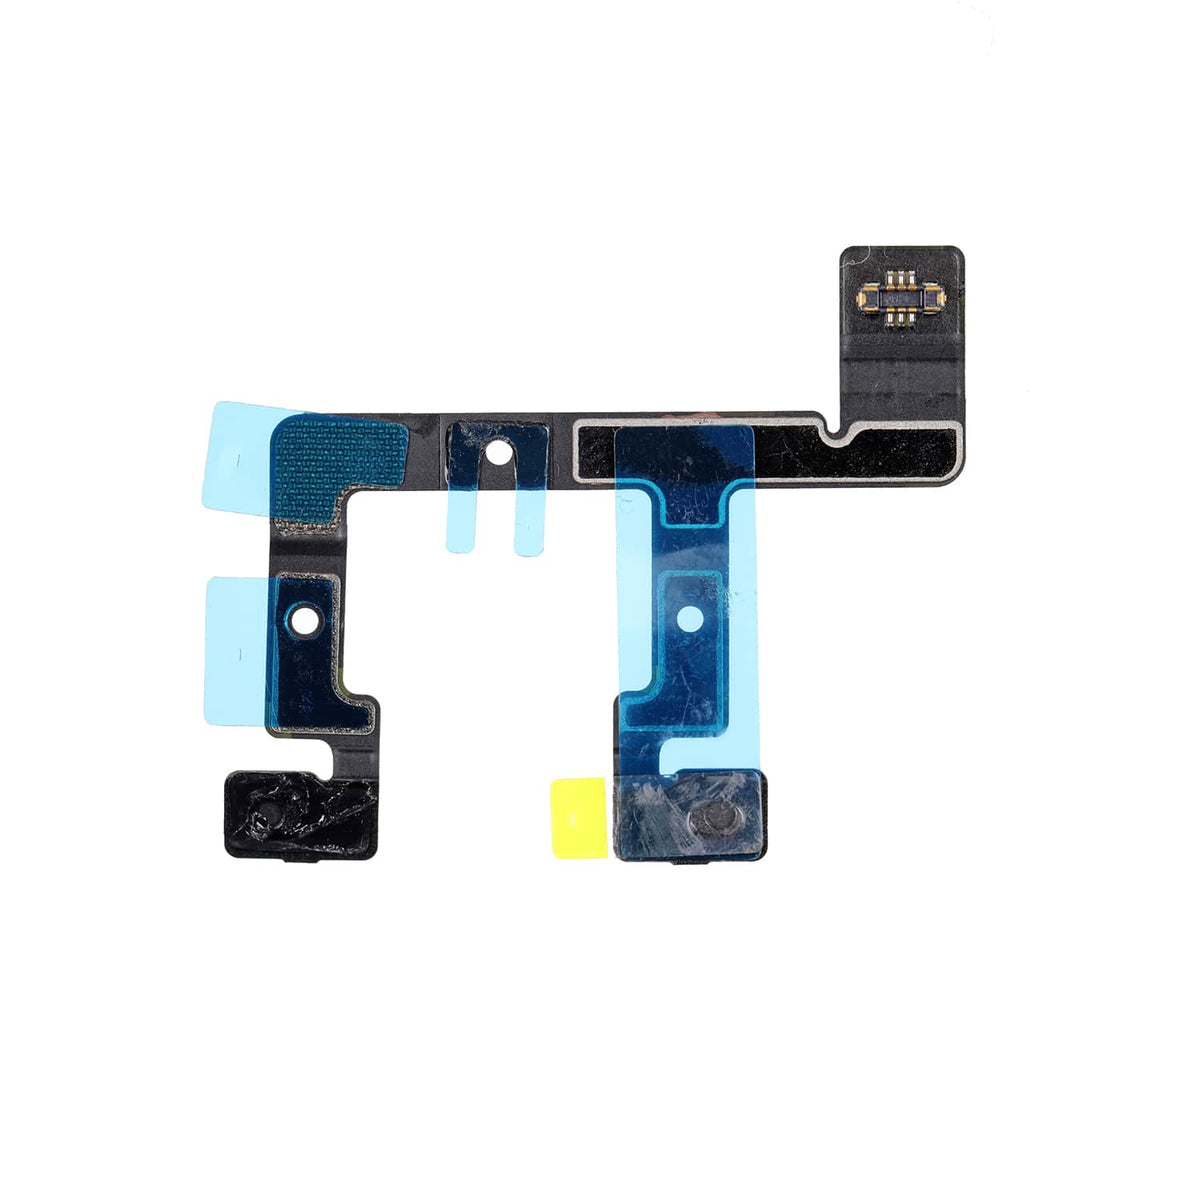 MICROPHONE FLEX CABLE FOR IPAD PRO 11" 1ST GEN